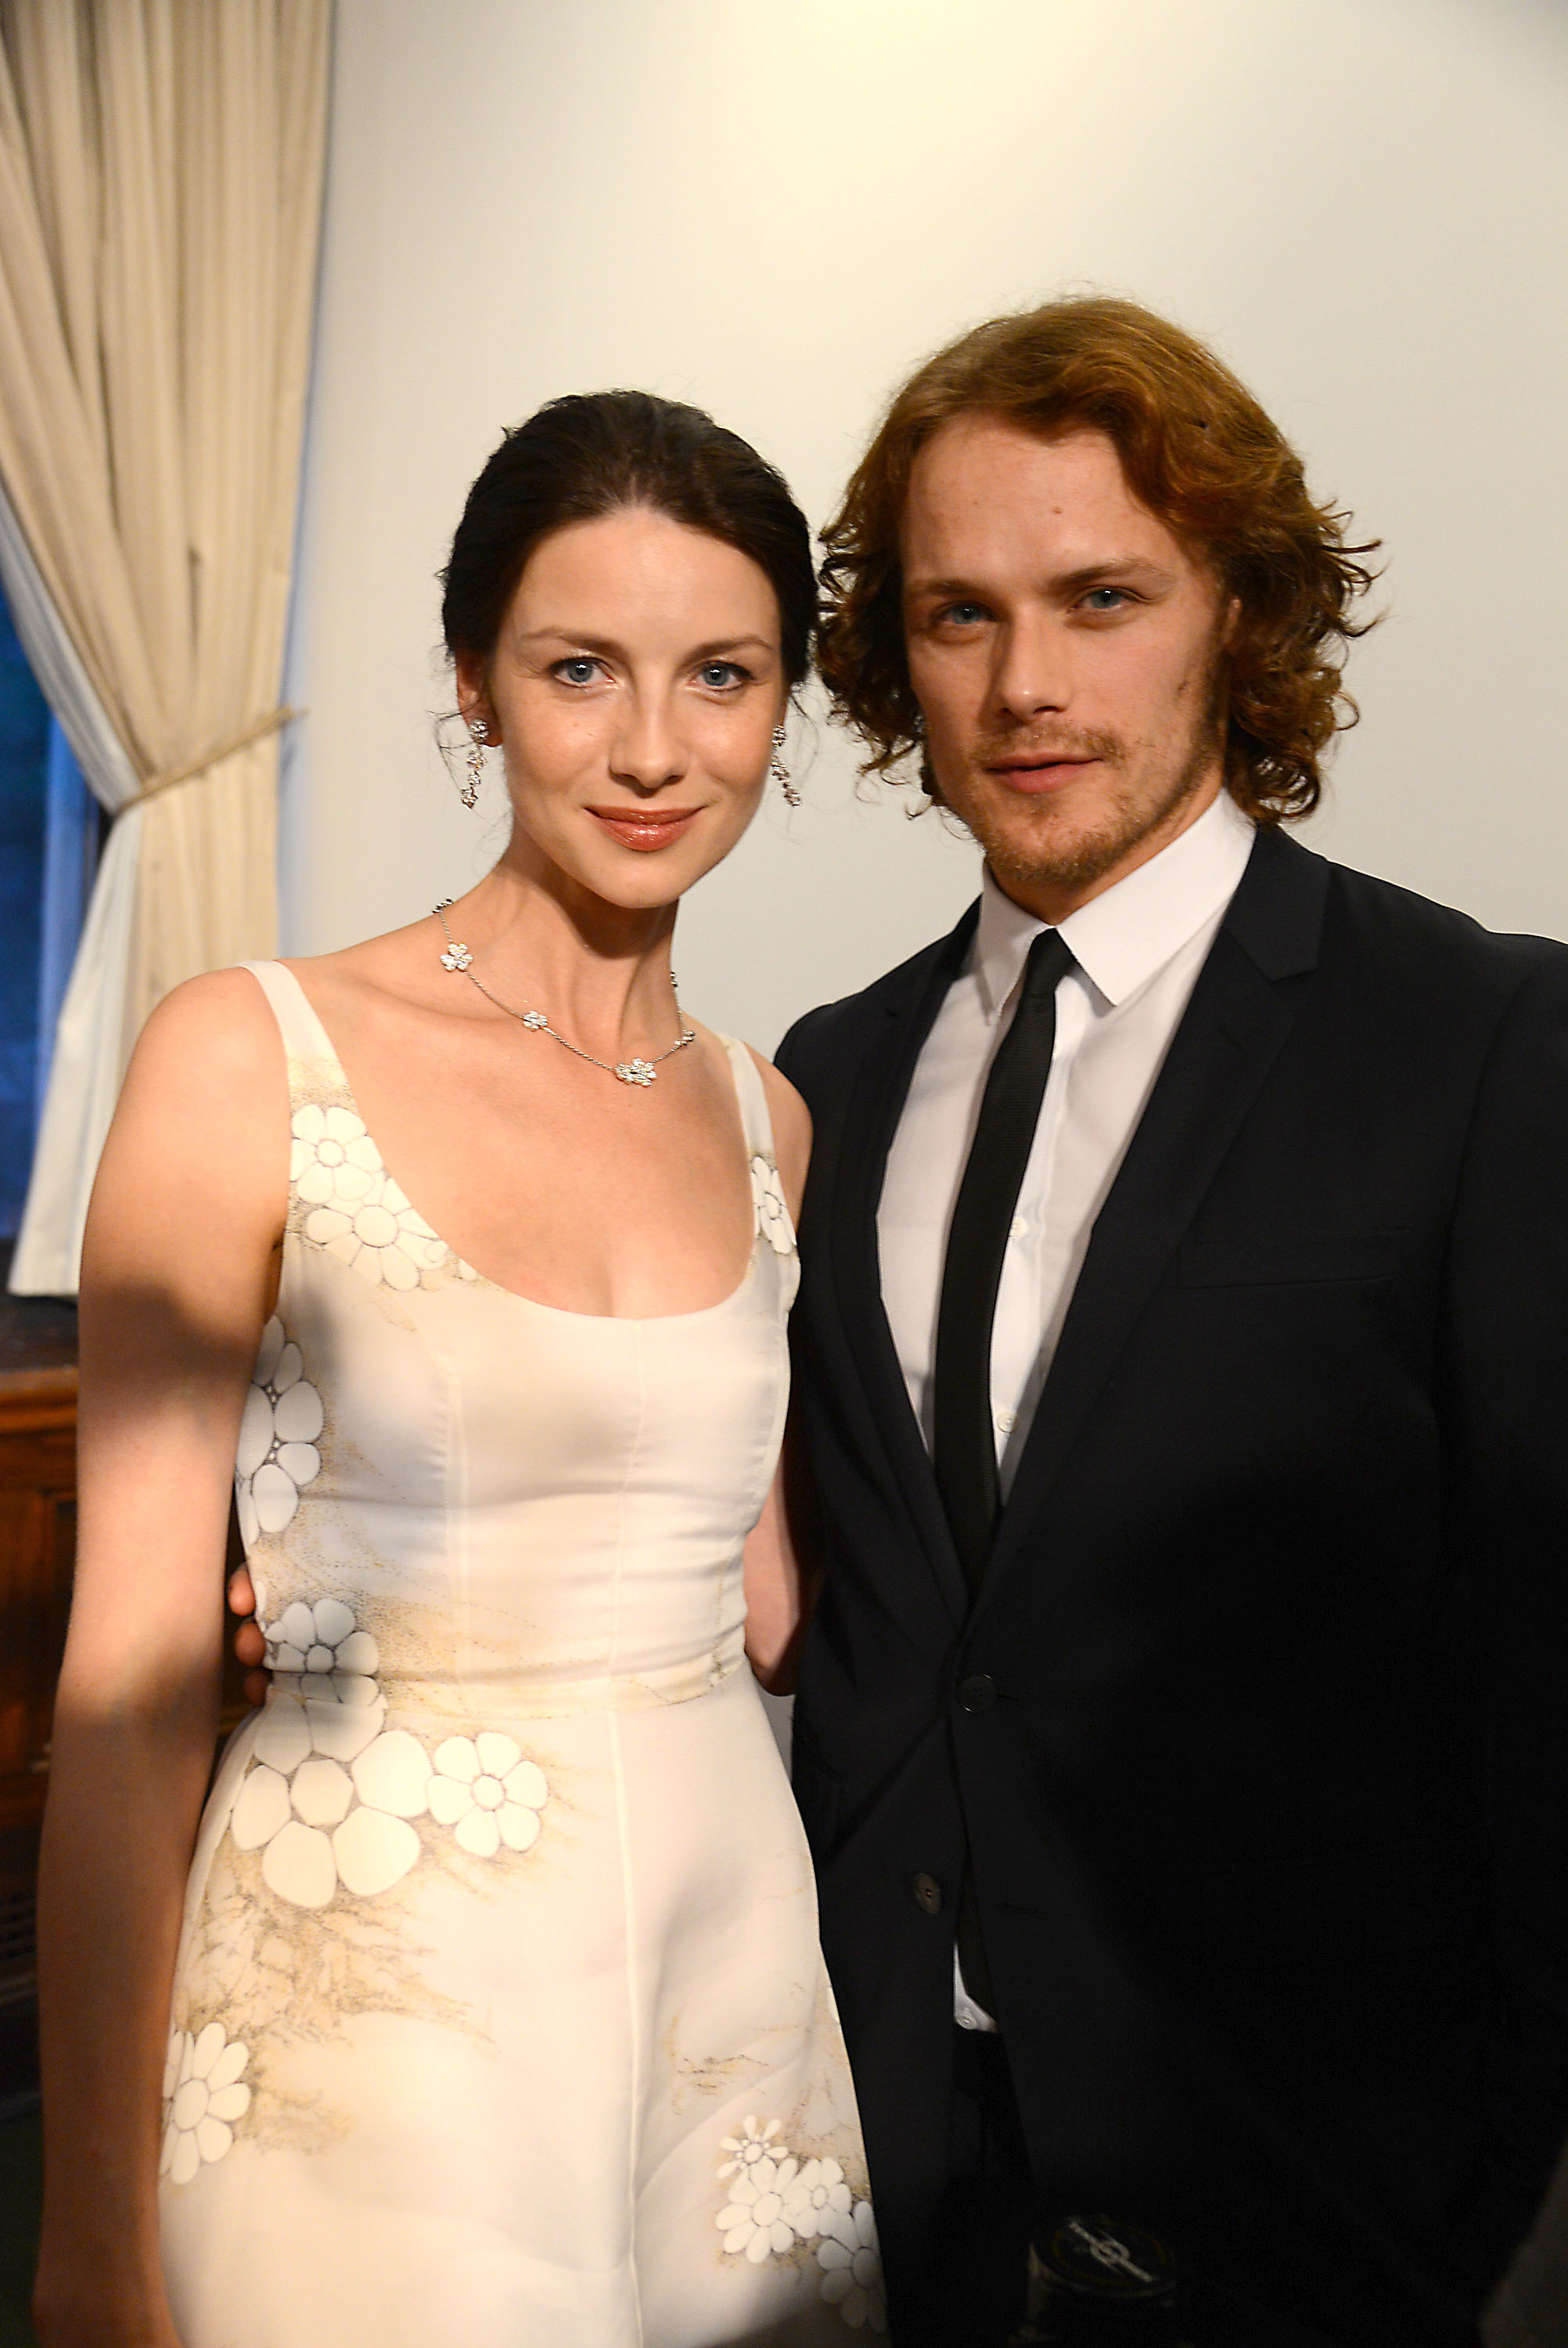 Old New Pic Of Caitriona Balfe & Sam Heughan At The NYC Screening Of Outlander